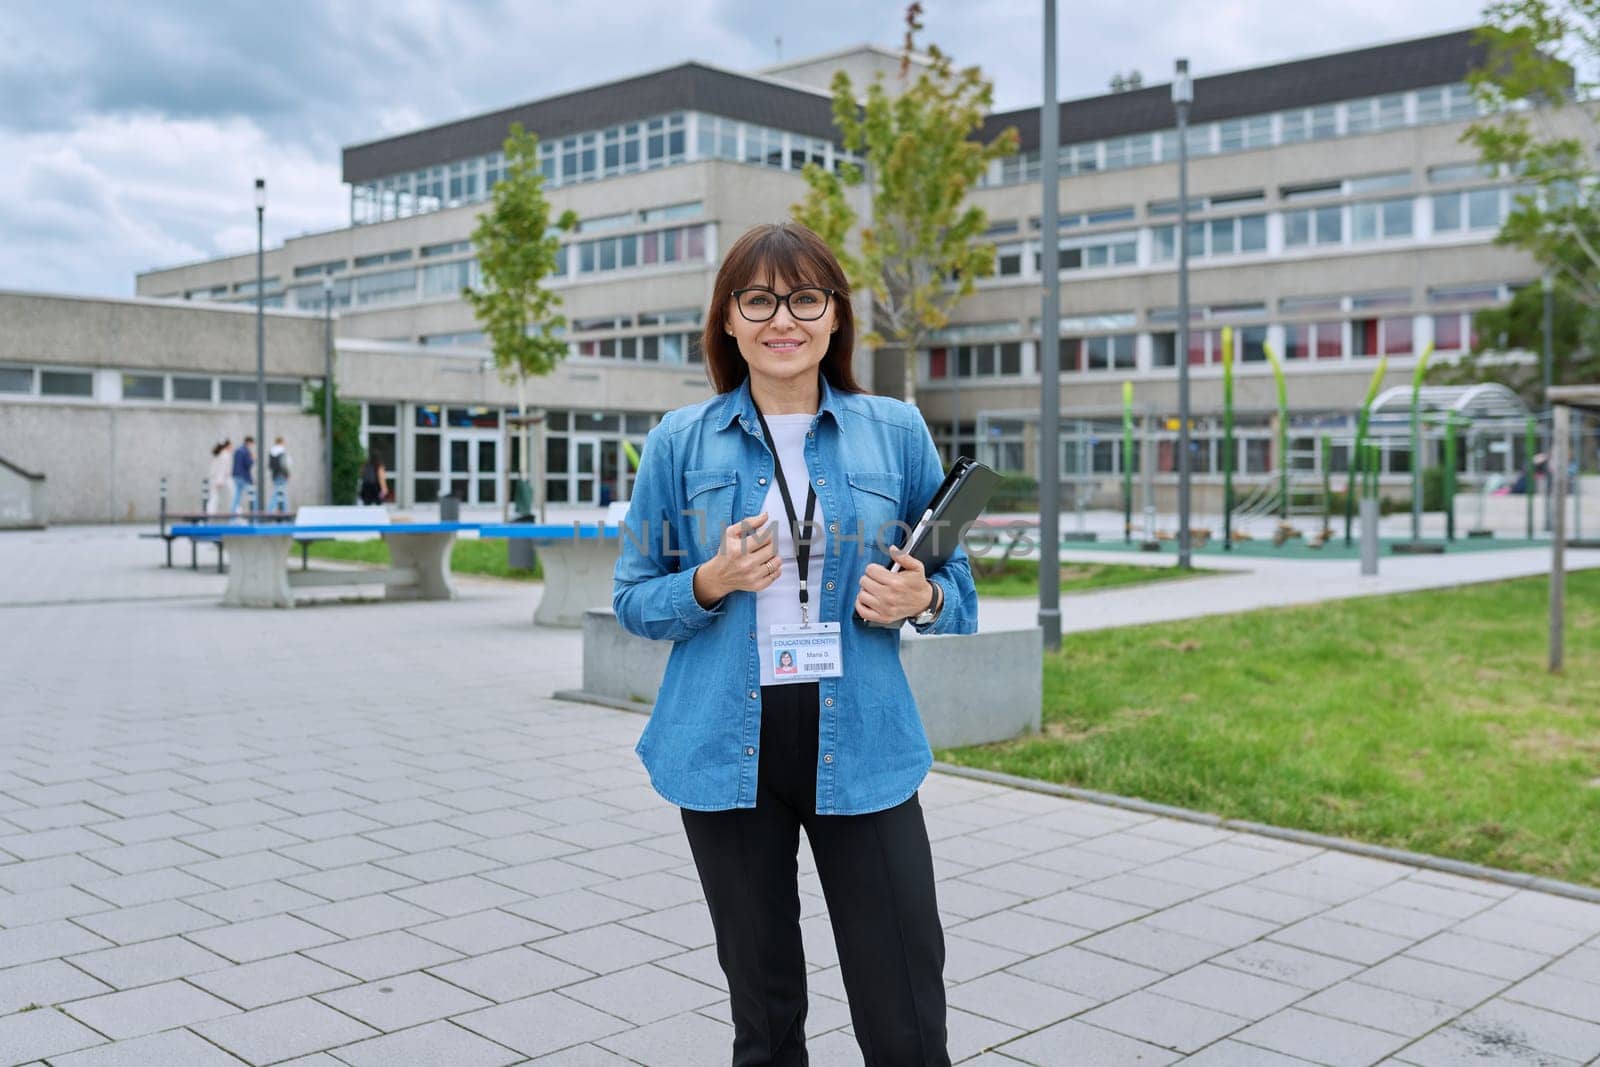 Middle-aged confident woman school teacher, mentor, pedagogue, psychologist, counselor, social worker with digital tablet in hands posing near school building, outdoor. Education, teaching, school